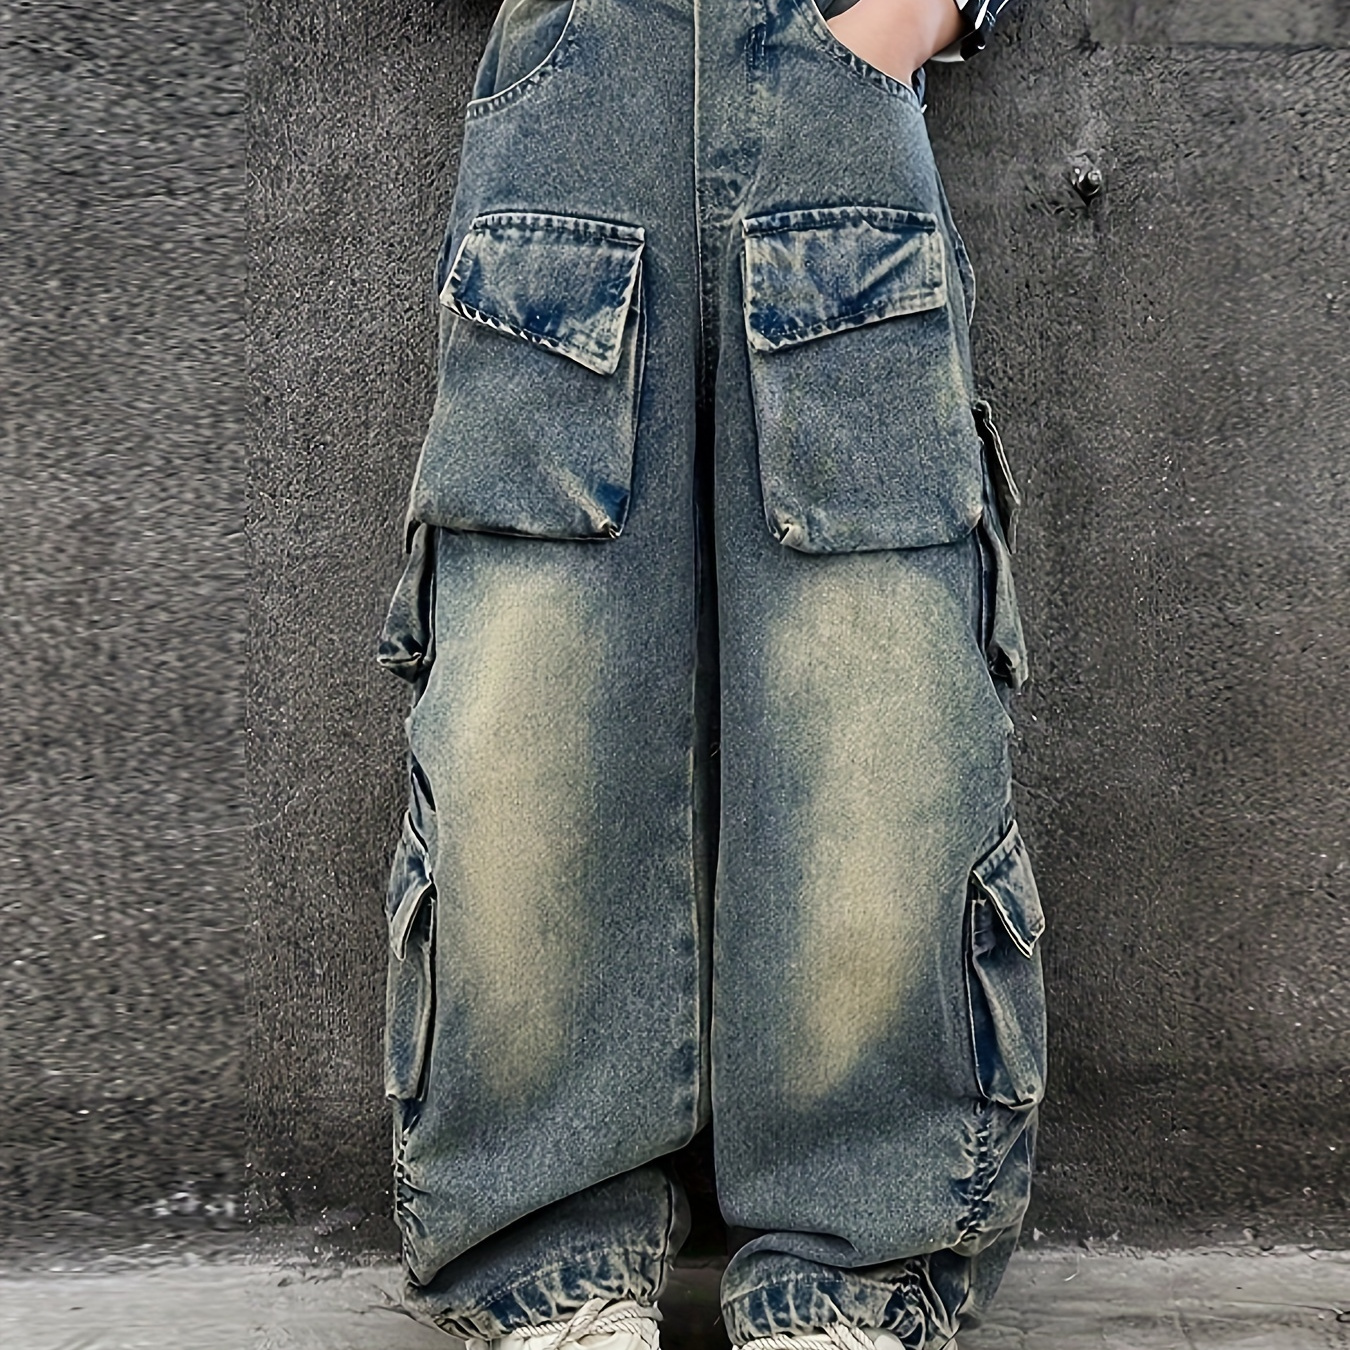 

Girls' Fashion Cargo Denim Jeans, Oversized Pockets, New Arrival, Casual Style, Trendy Streetwear, Wide Leg Pants For Kids And Teens, Fluid Pants